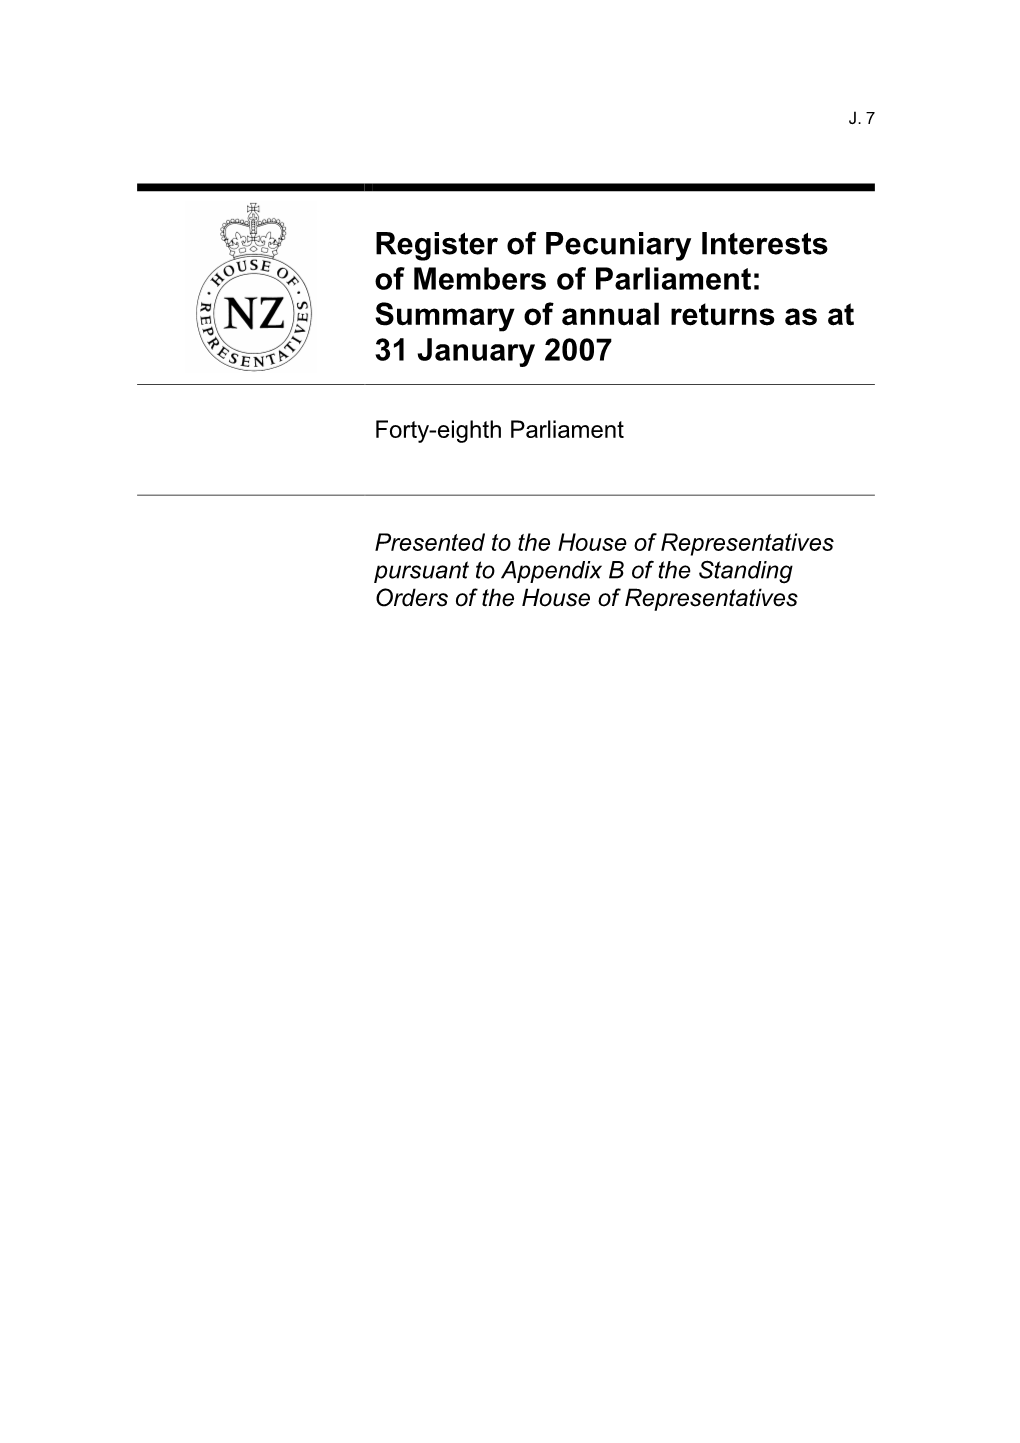 Register of Pecuniary Interests of Members of Parliament: Summary of Annual Returns As at 31 January 2007